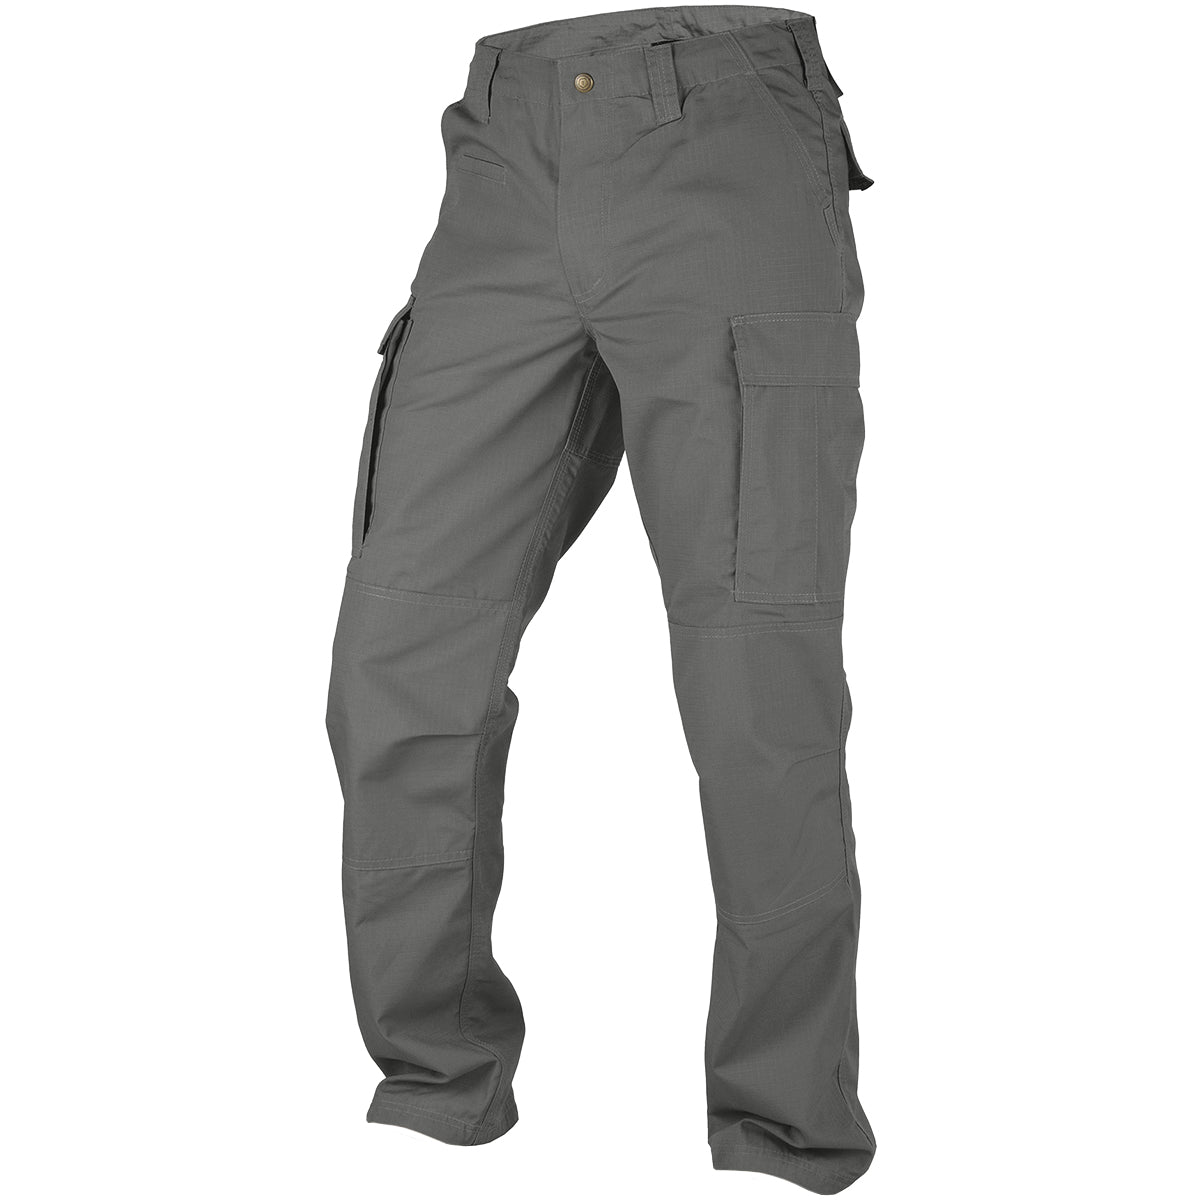 Dominance Stretchable cotton Cargo Trouser | Cargo Pants - Grey ...